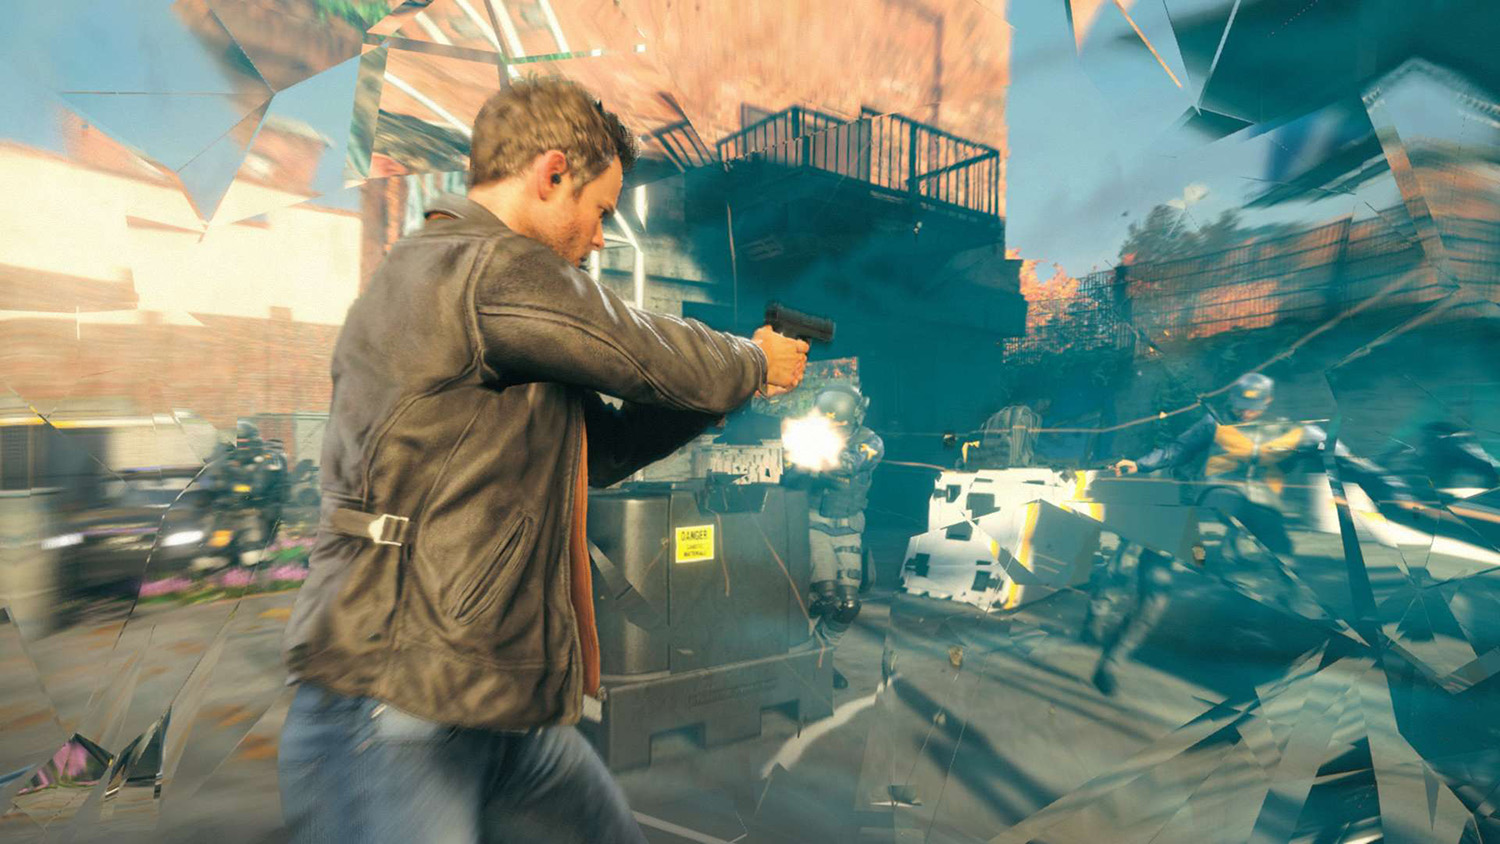 Quantum Break studio's classic PS2 shooter Max Payne is coming to